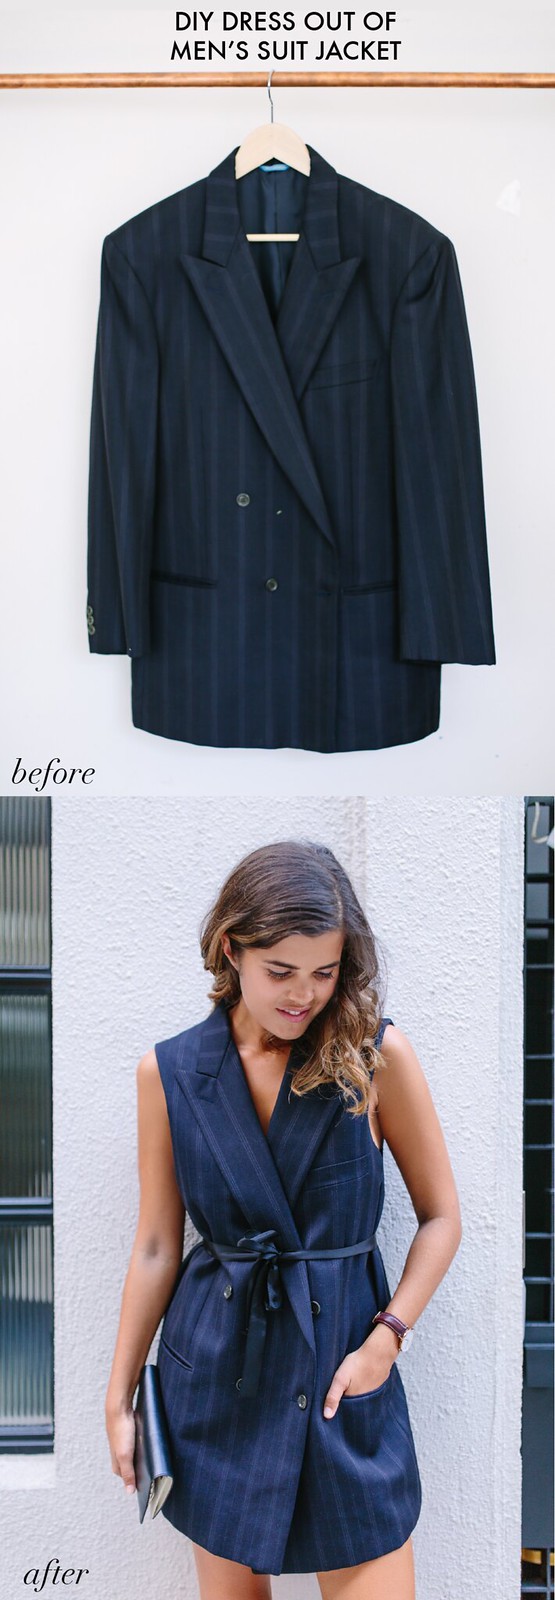 Turn a Suit Jacket Into a Dress